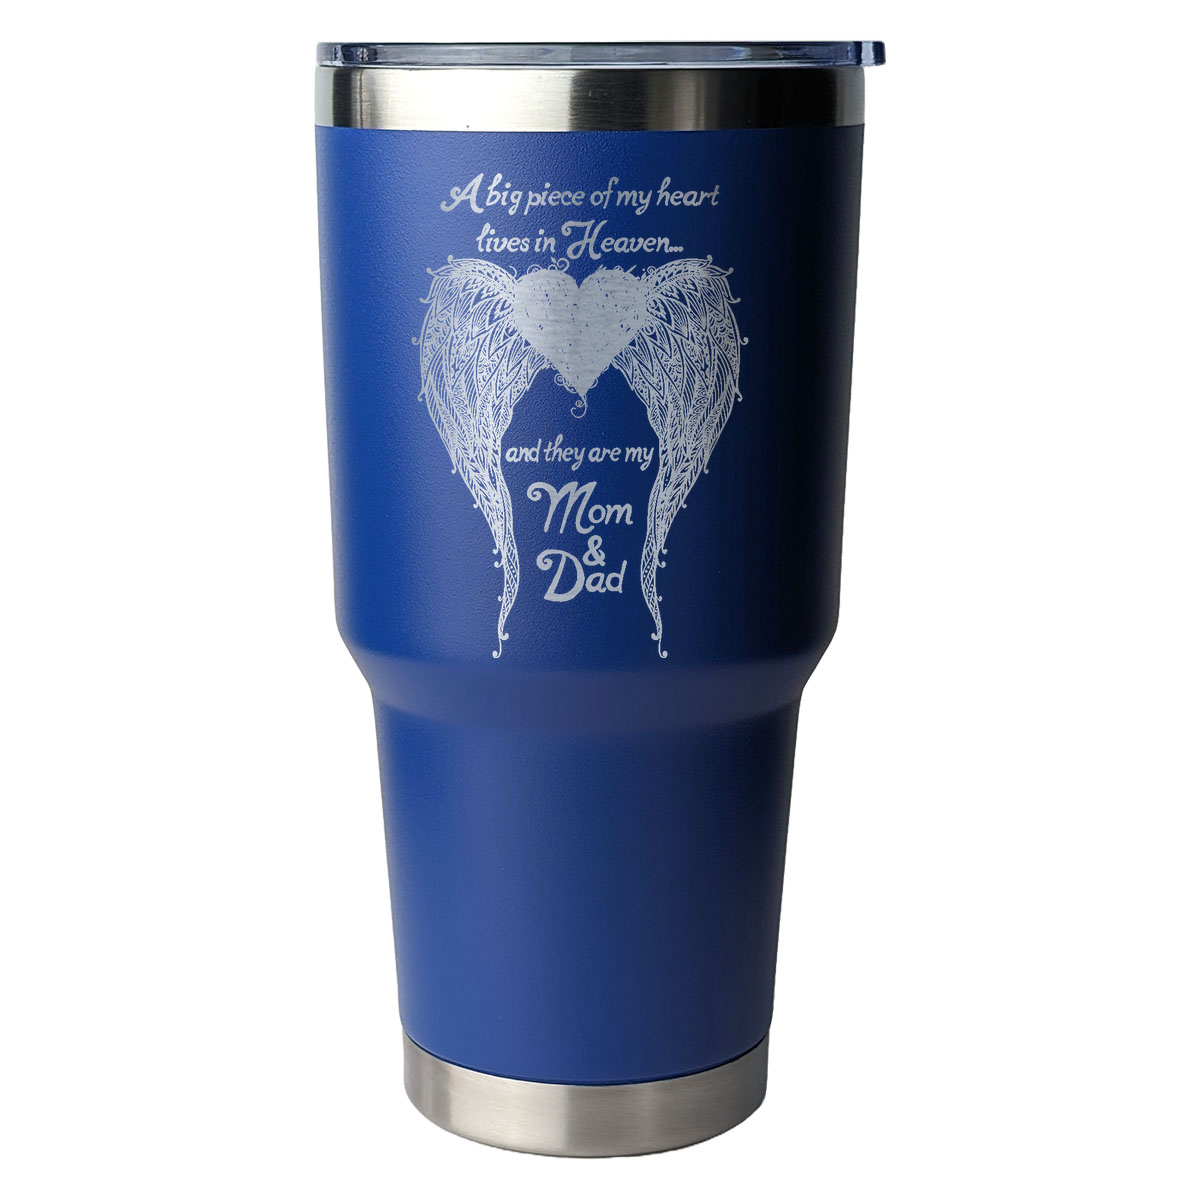 Mom &amp; Dad - A Big Piece of my Heart 30 Ounce Laser Etched Tumbler Blue